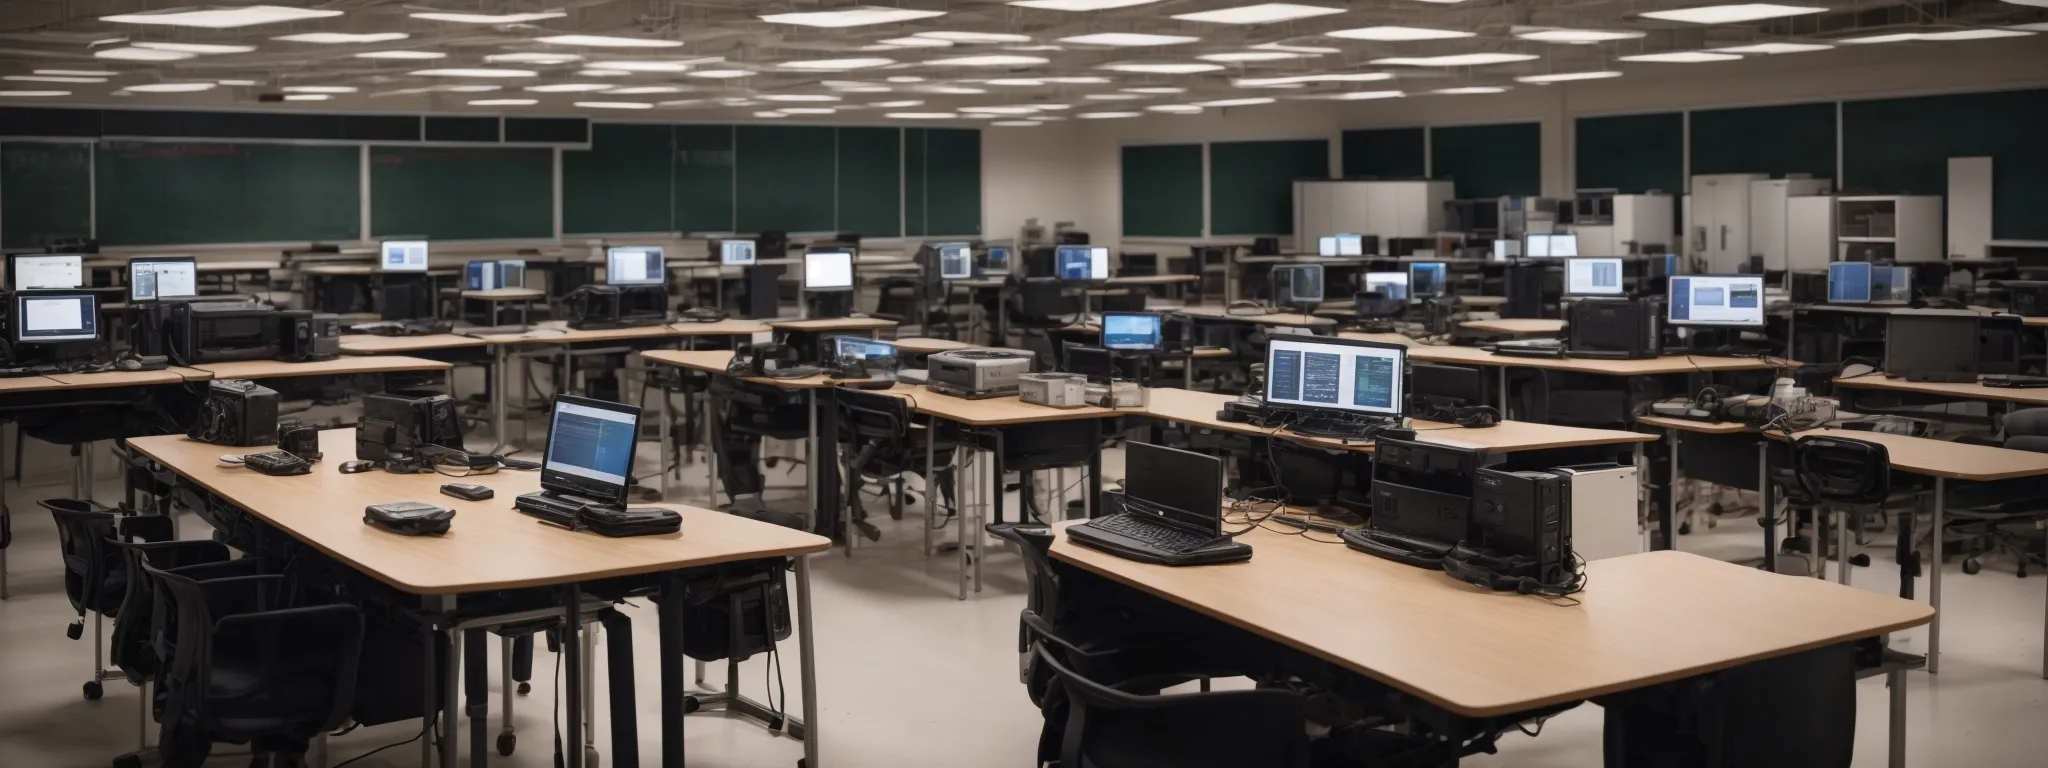 a wide-angle view of an empty modern classroom projecting growth potential, featuring rows of desks equipped with computers ready to integrate a scalable learning management system.